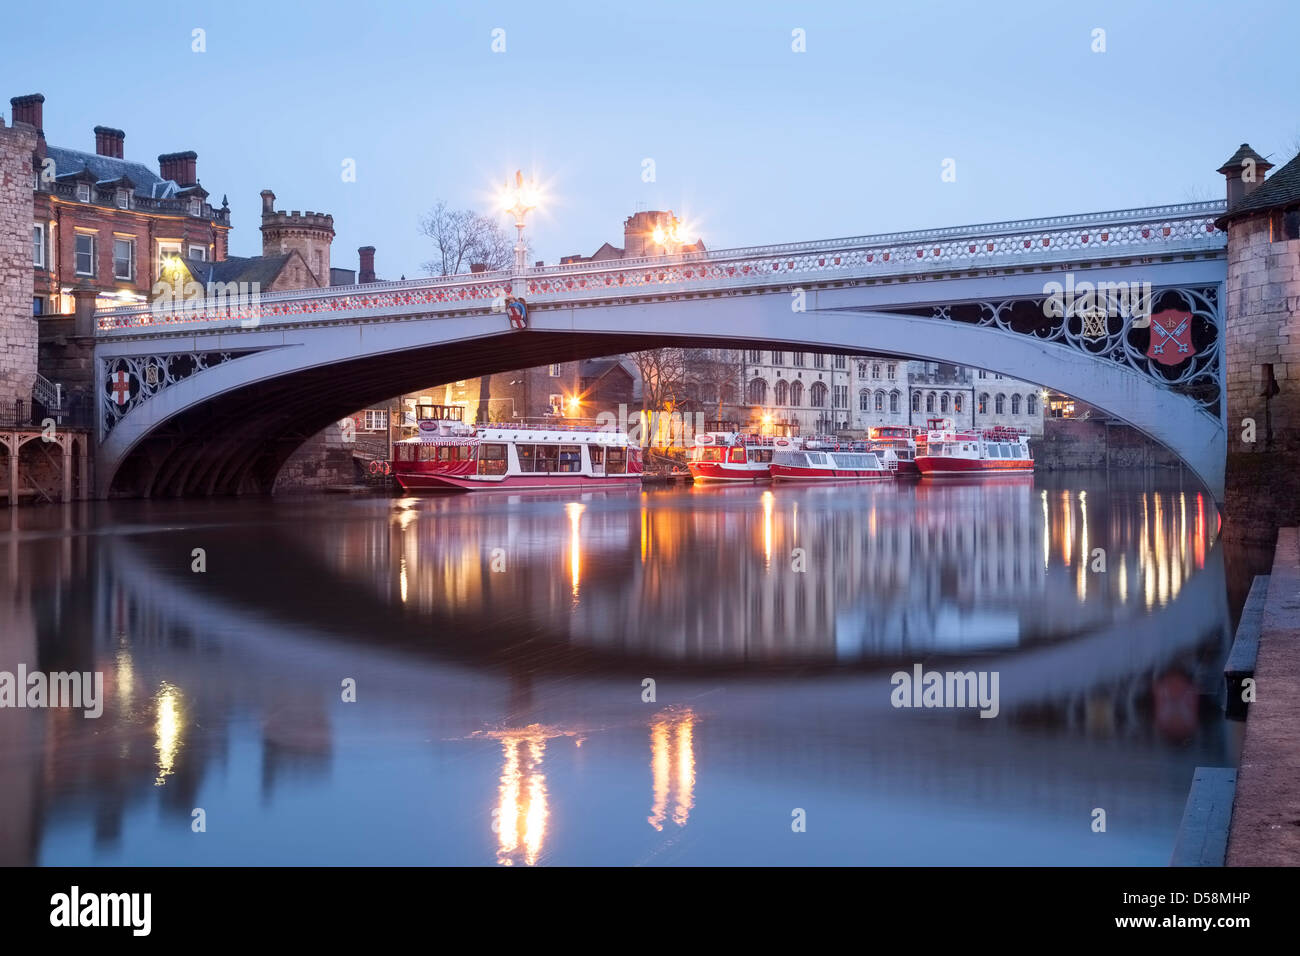 Lendal Bridge over the river Ouse in York, North Yorkshire. Stock Photo